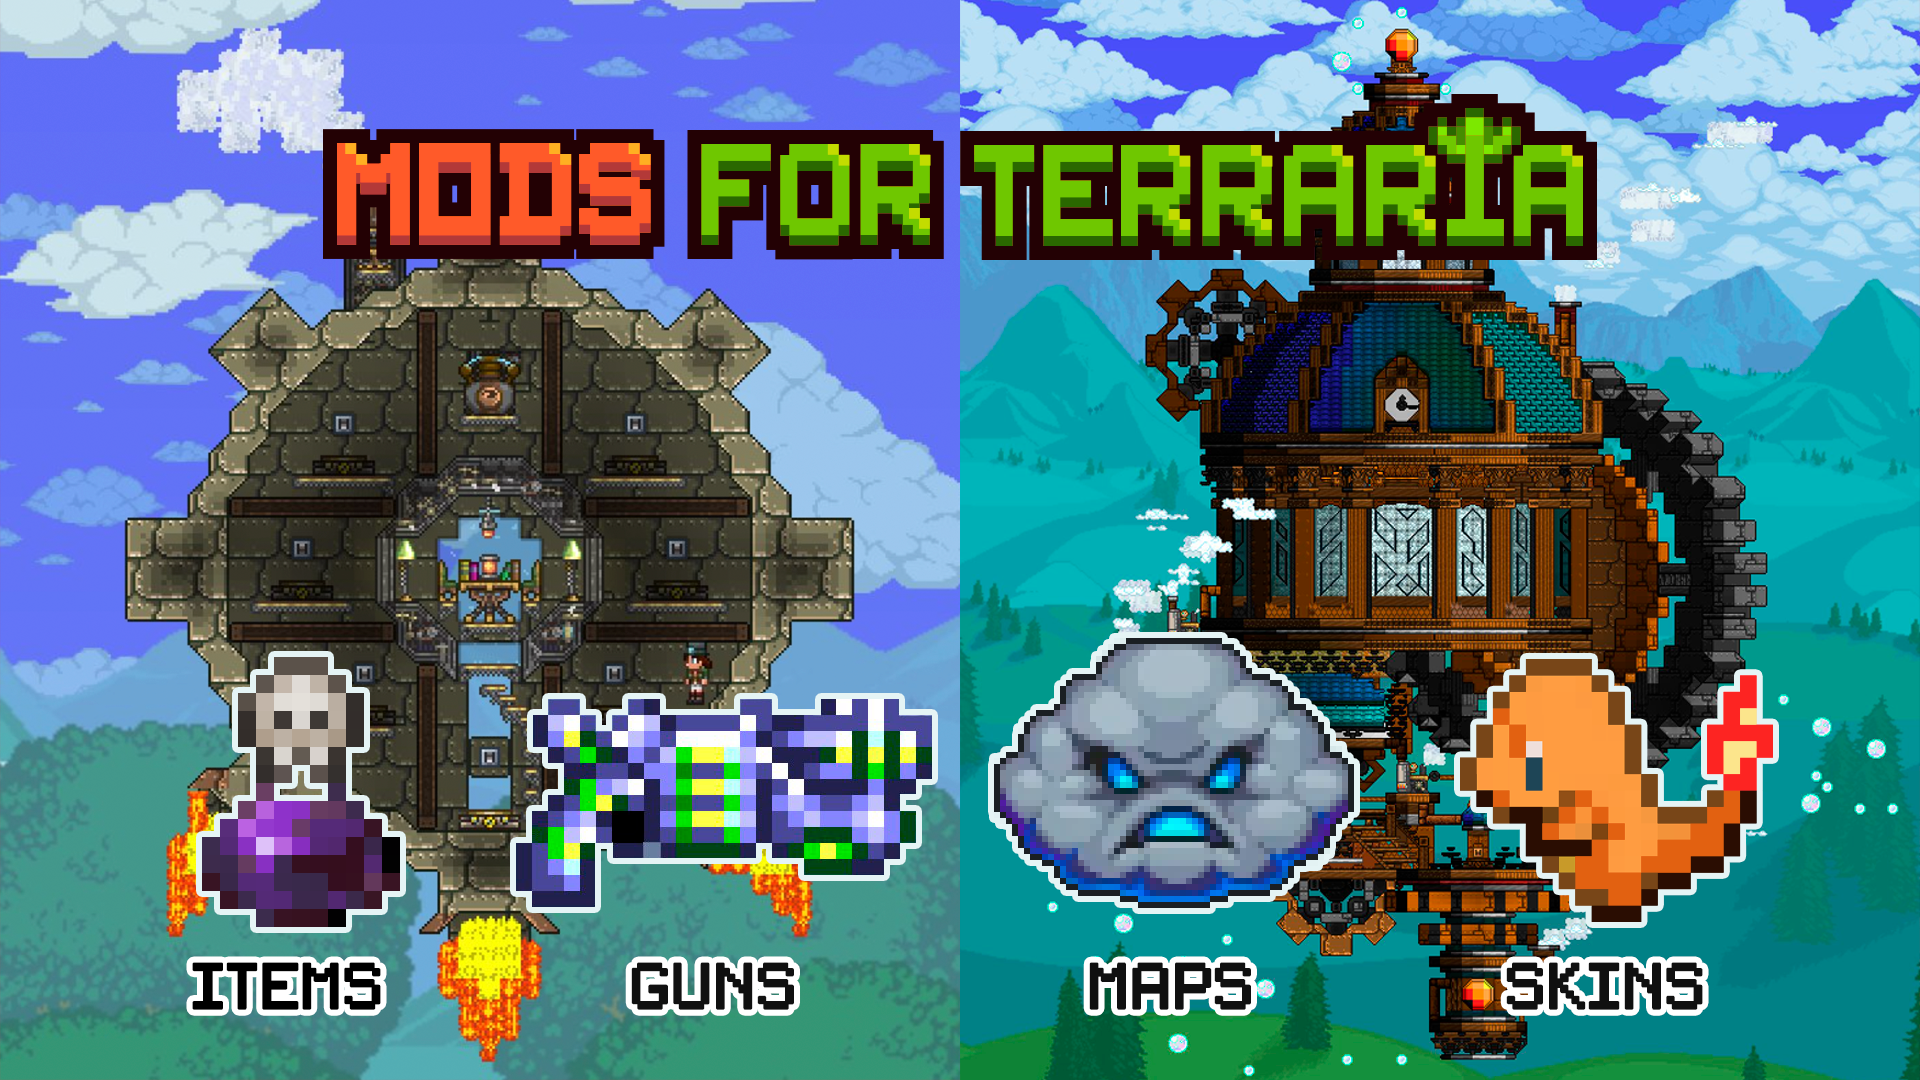 Port to forward for terraria фото 51